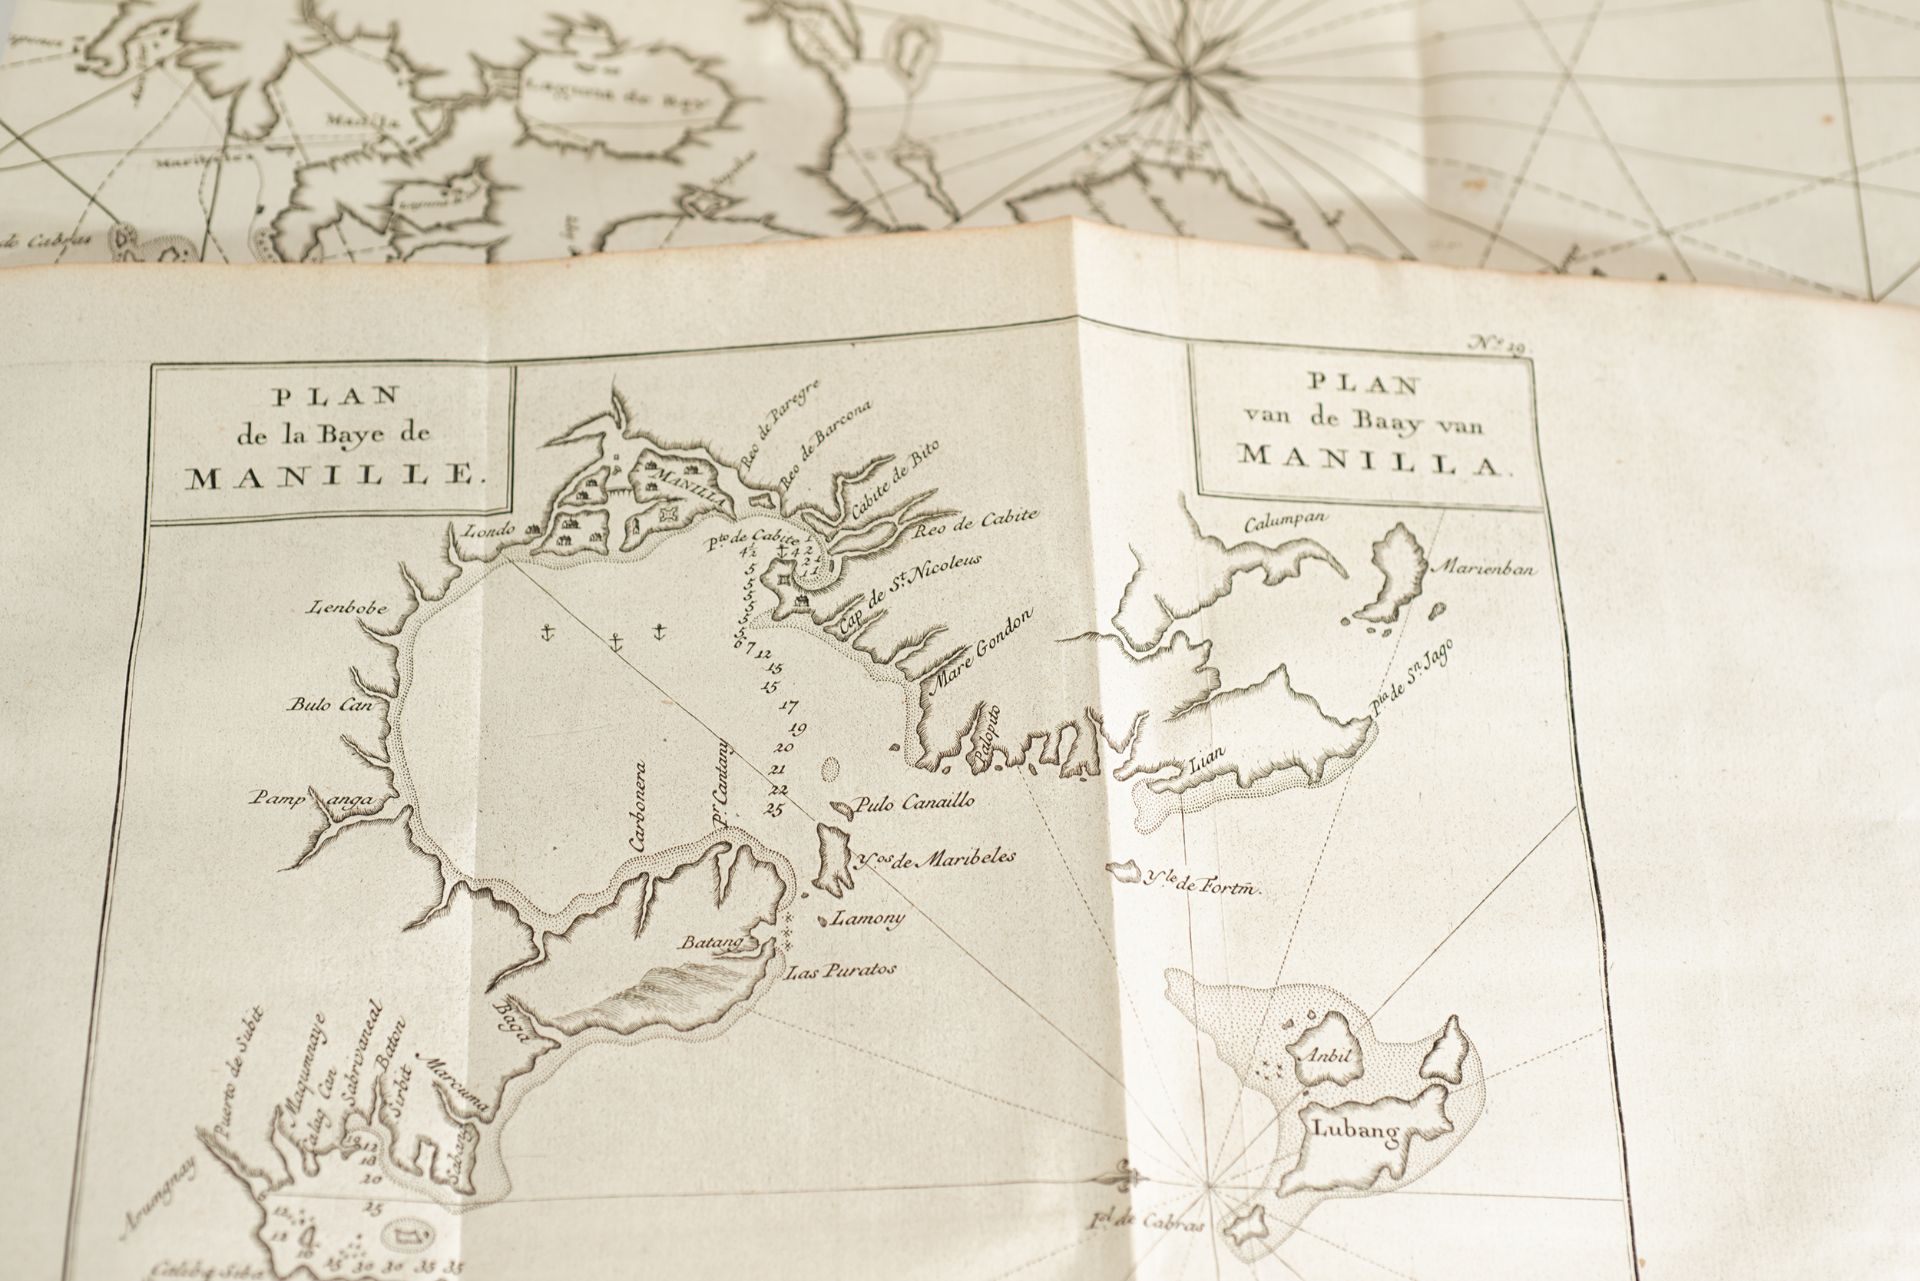 Lord Anson's Voyage Around the World, translated from English, edited 1749 - Image 9 of 12